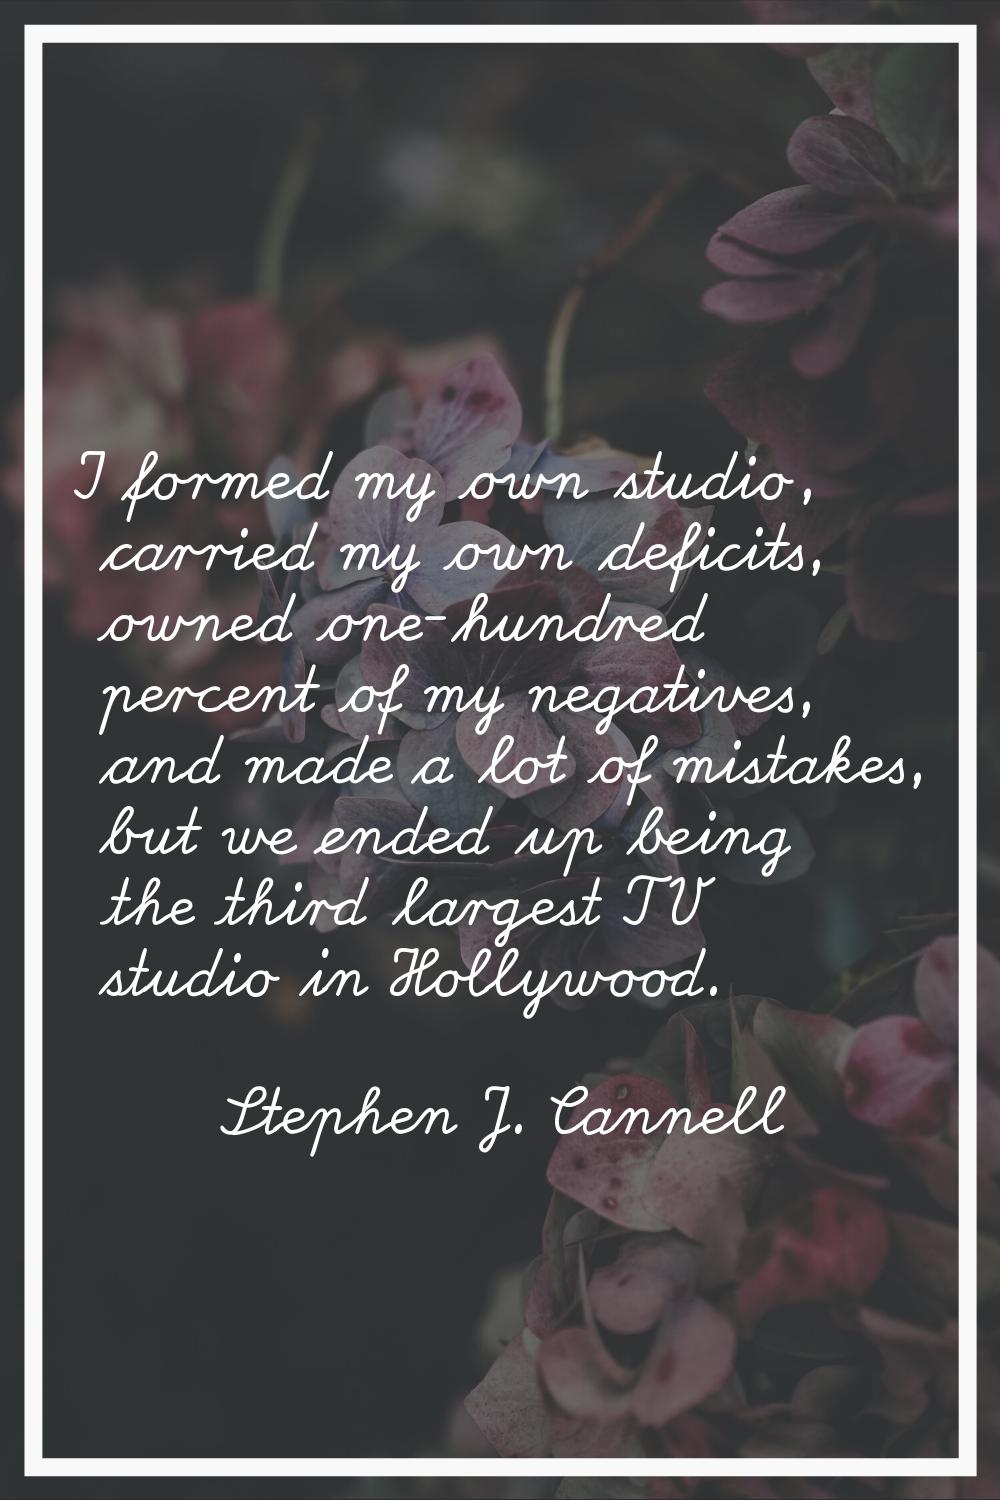 I formed my own studio, carried my own deficits, owned one-hundred percent of my negatives, and mad